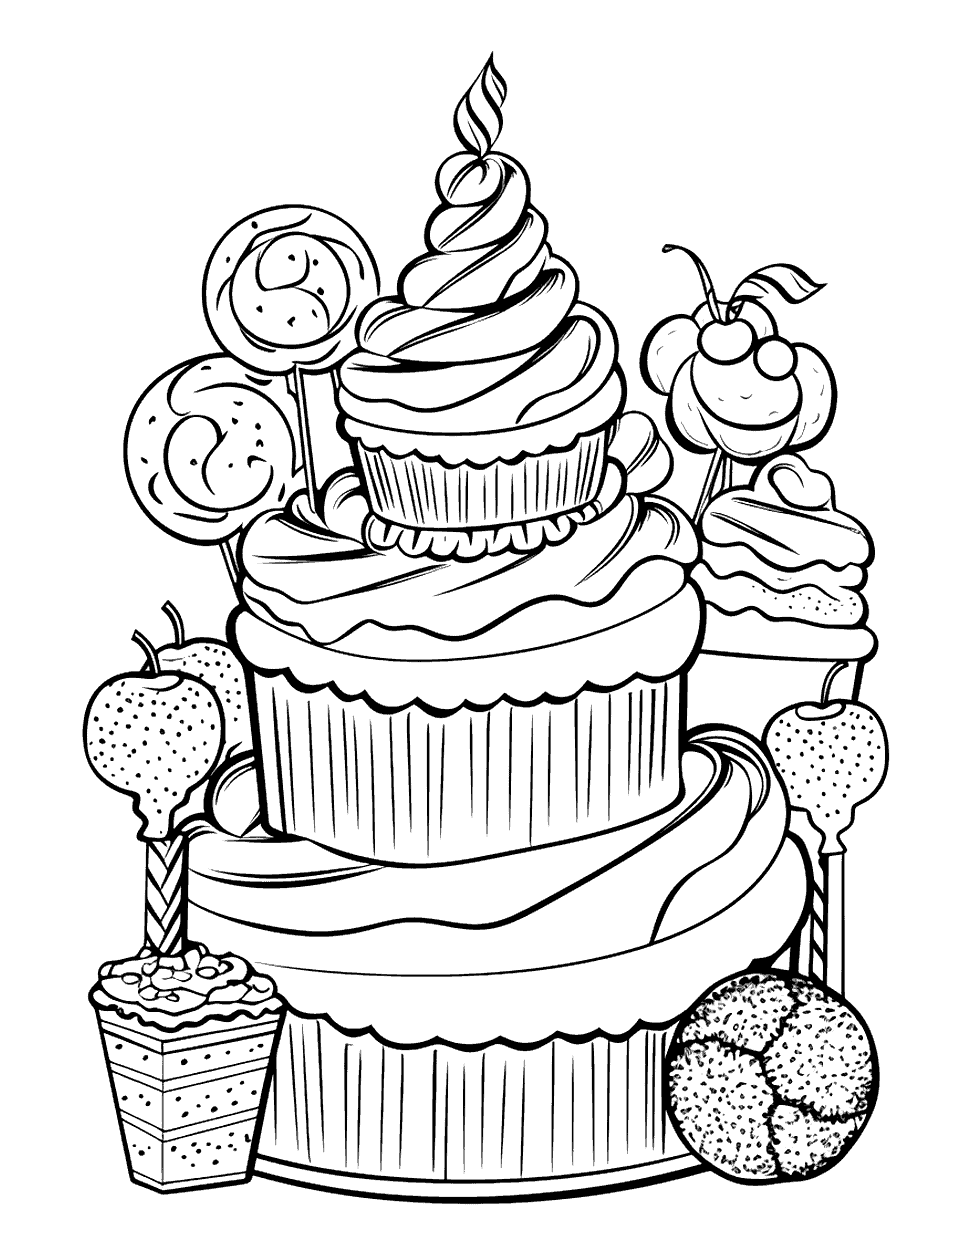 Candy Land Cake Coloring Page - A cake with a theme of various candies and sweets.